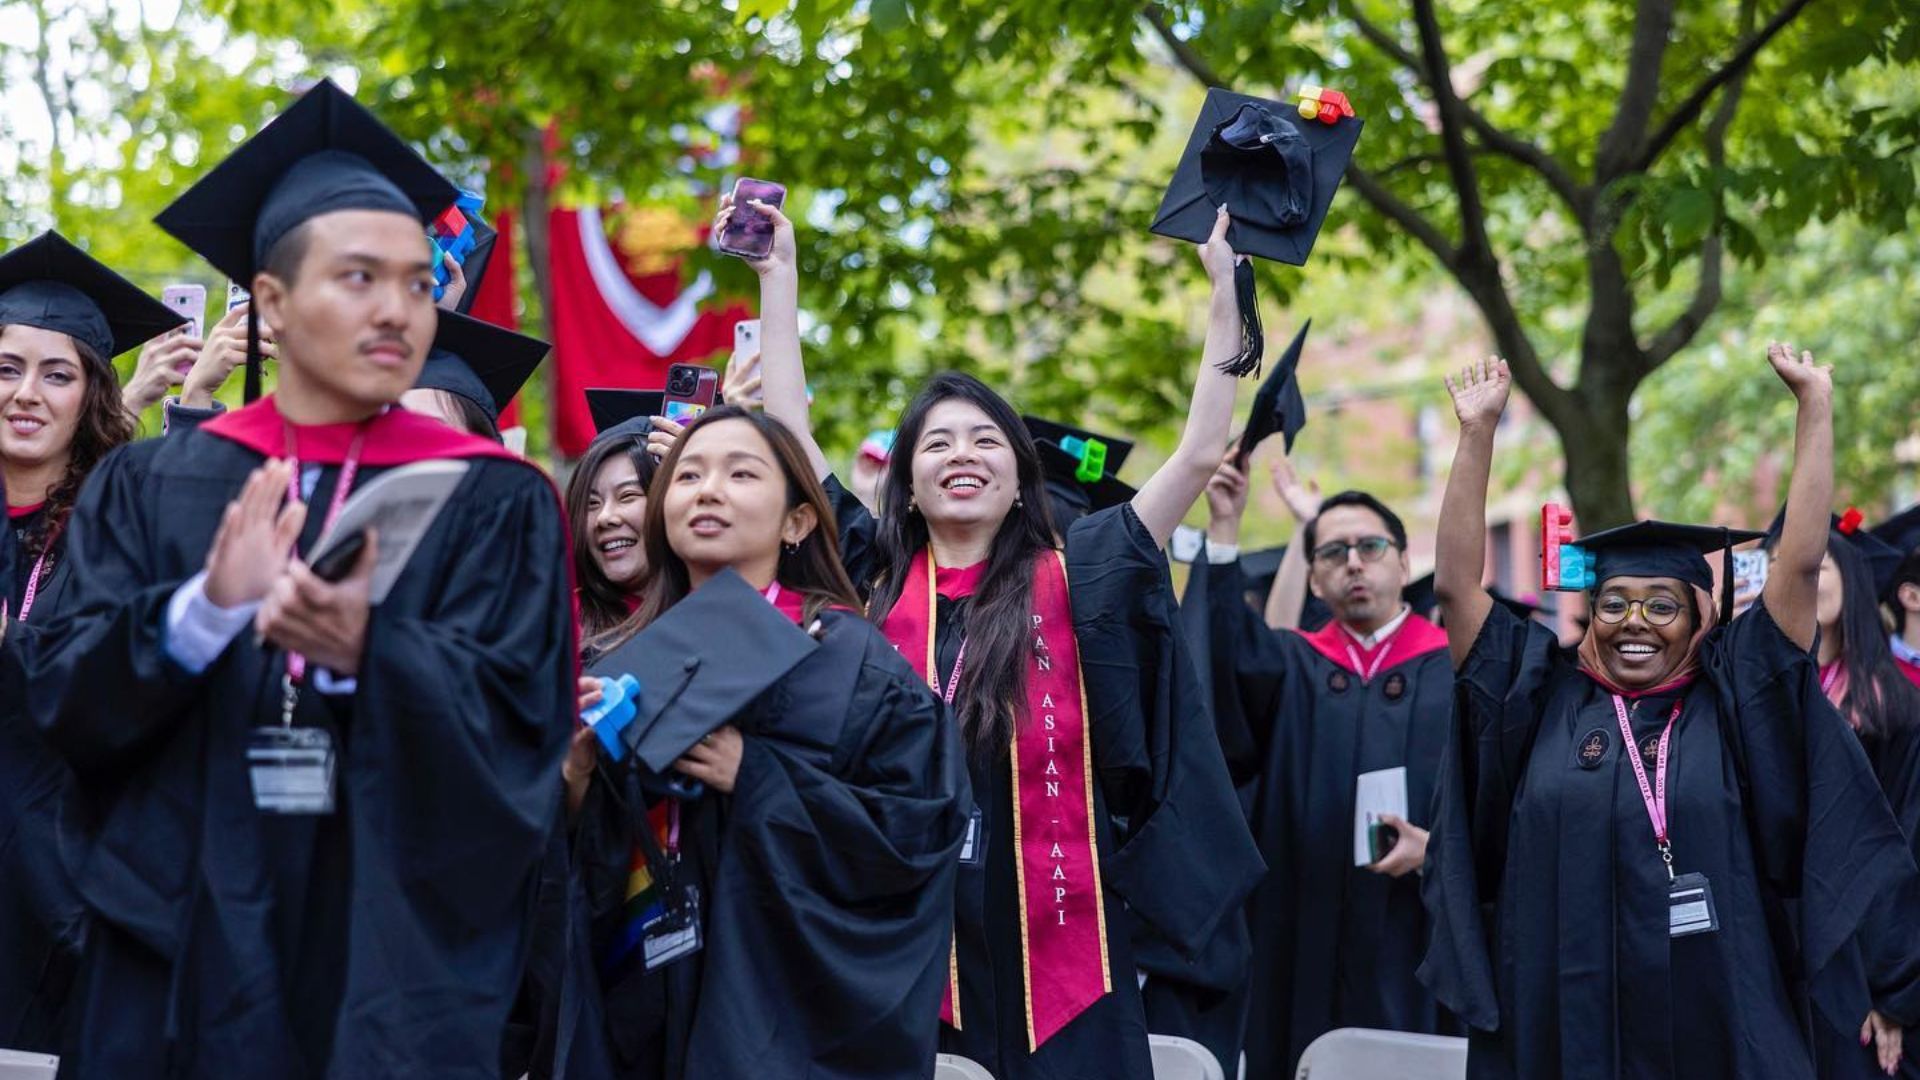 <p>"The inability to graduate is consequential for students and their families," Harvard <a href="https://www.nbcnews.com/news/us-news/students-walk-harvard-college-graduation-ucla-contends-new-protest-rcna153822">stated</a>, acknowledging the serious implications of their decision not to allow certain students to graduate.   </p> <p>This situation overshadowed what is traditionally a celebratory occasion for many. </p>